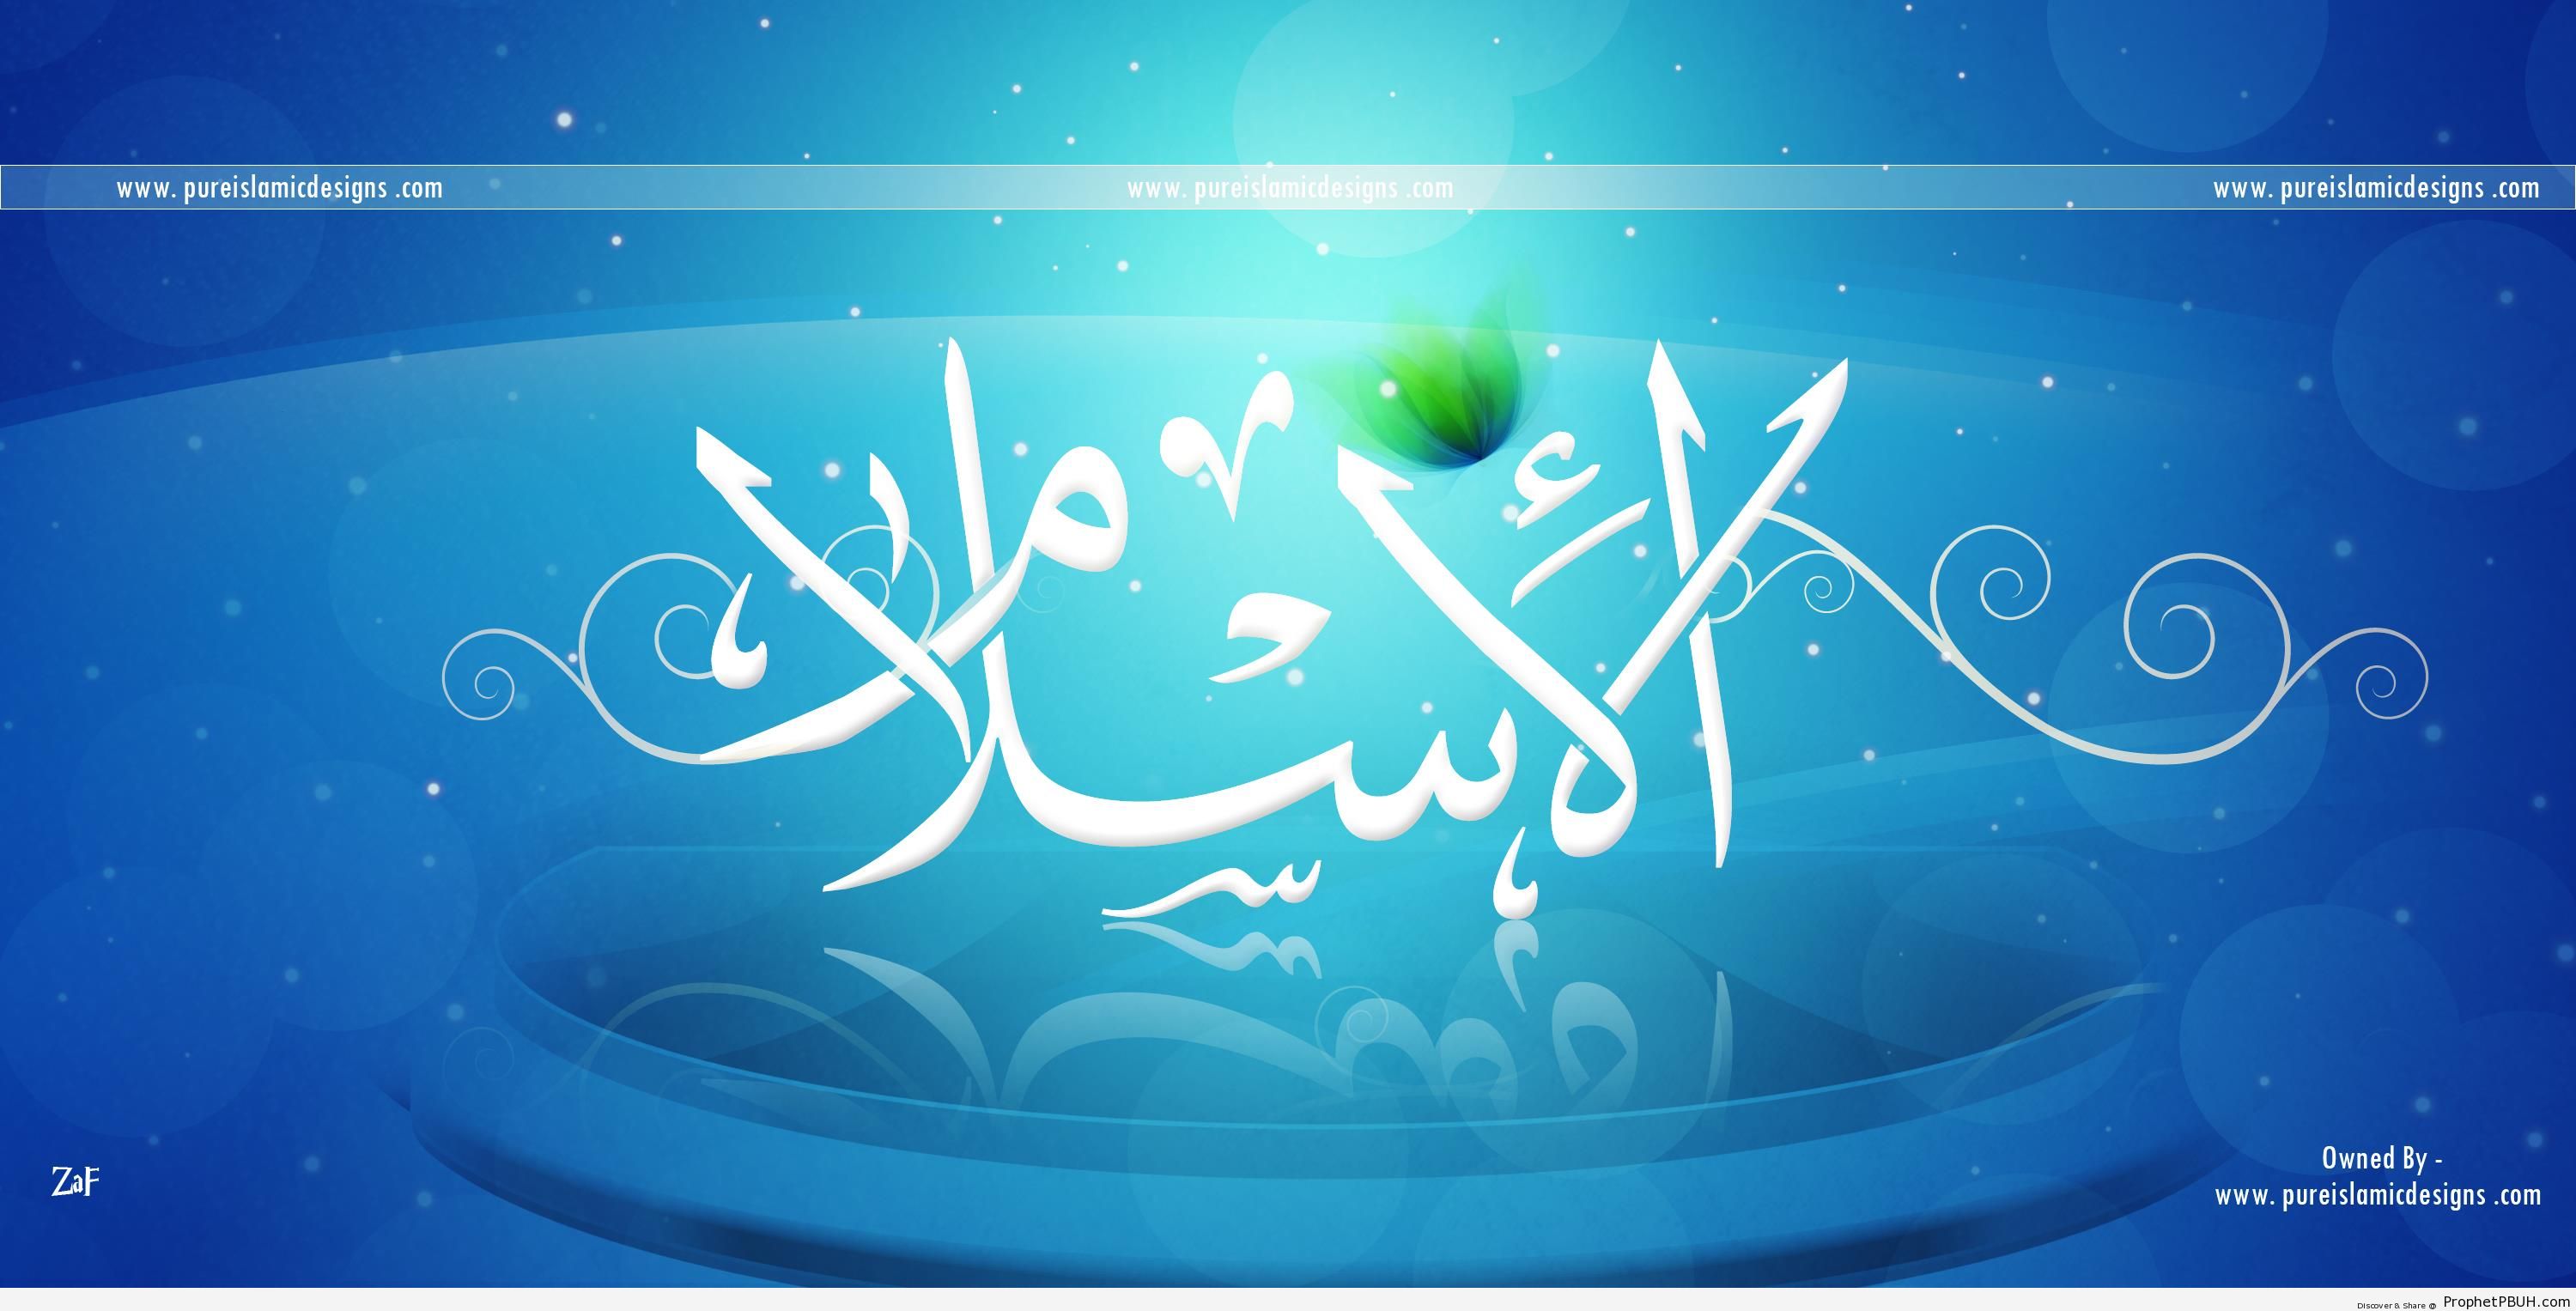 Calligraphy of the Word -Islam- on Blue Background - Islamic Calligraphy and Typography 